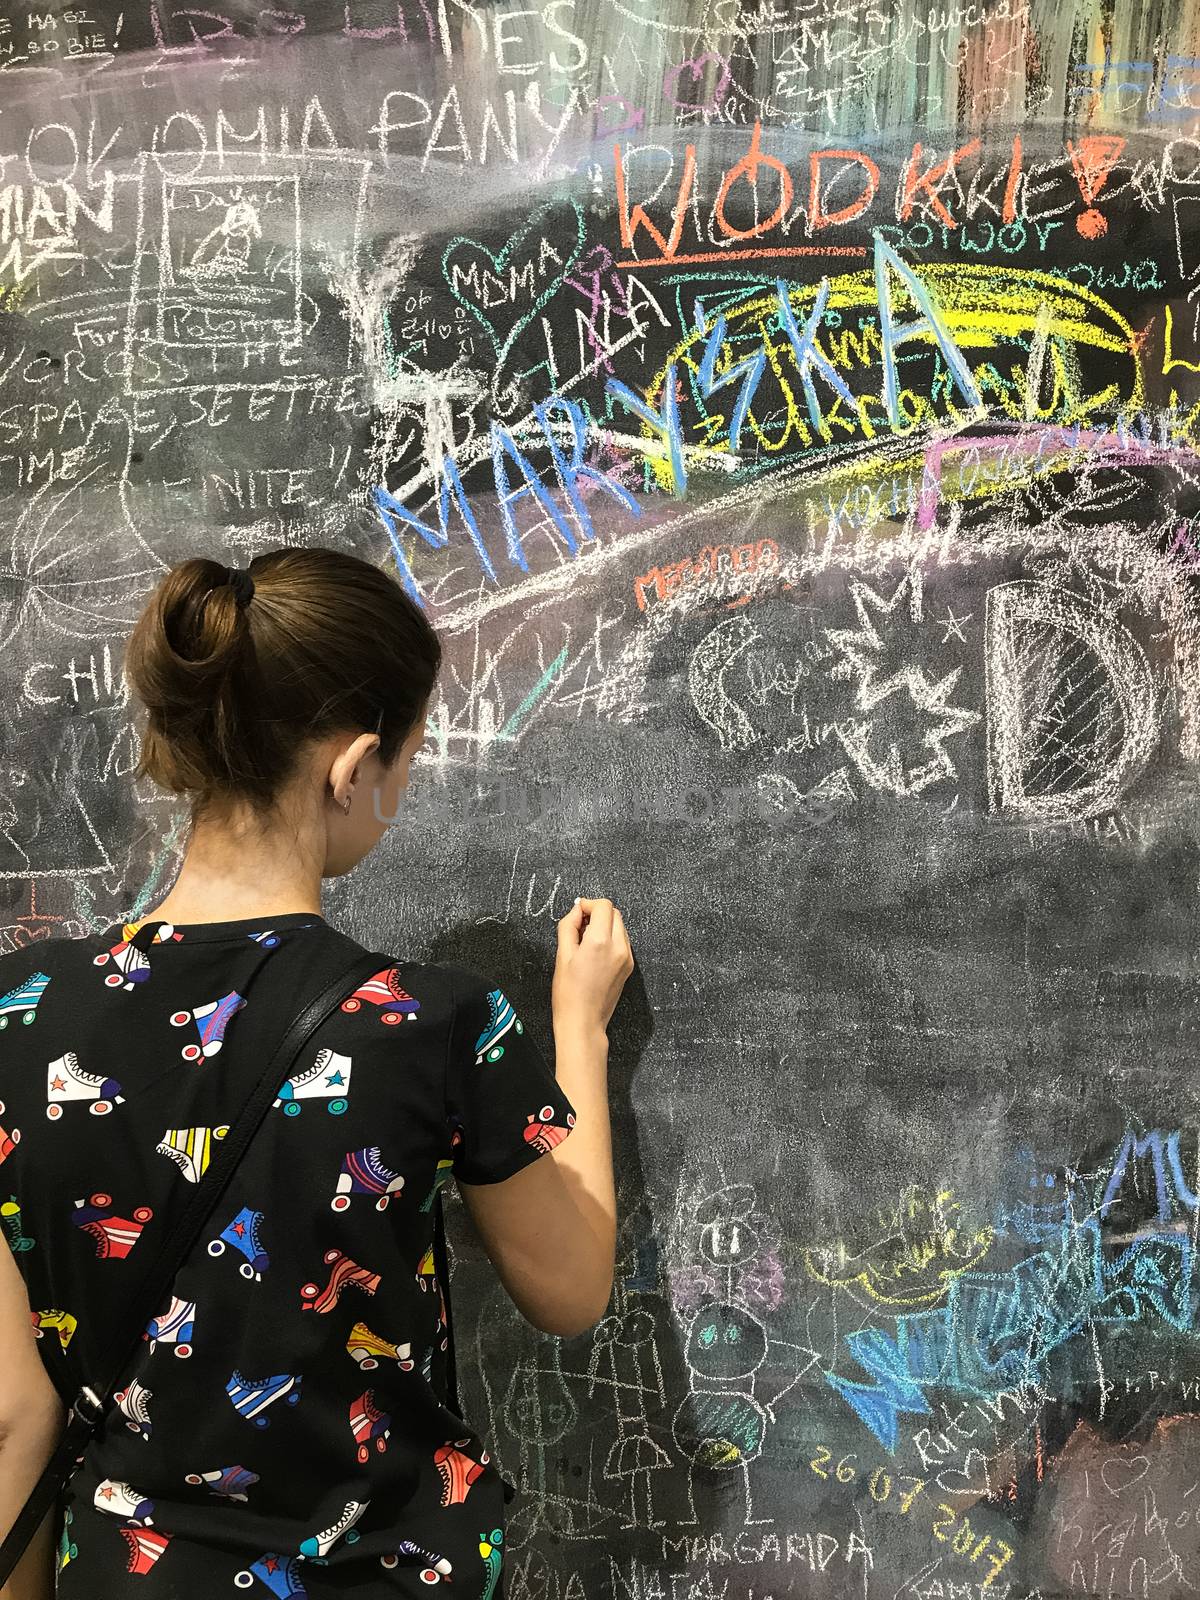 Back to school. A child paints scribbles by chalk on a board